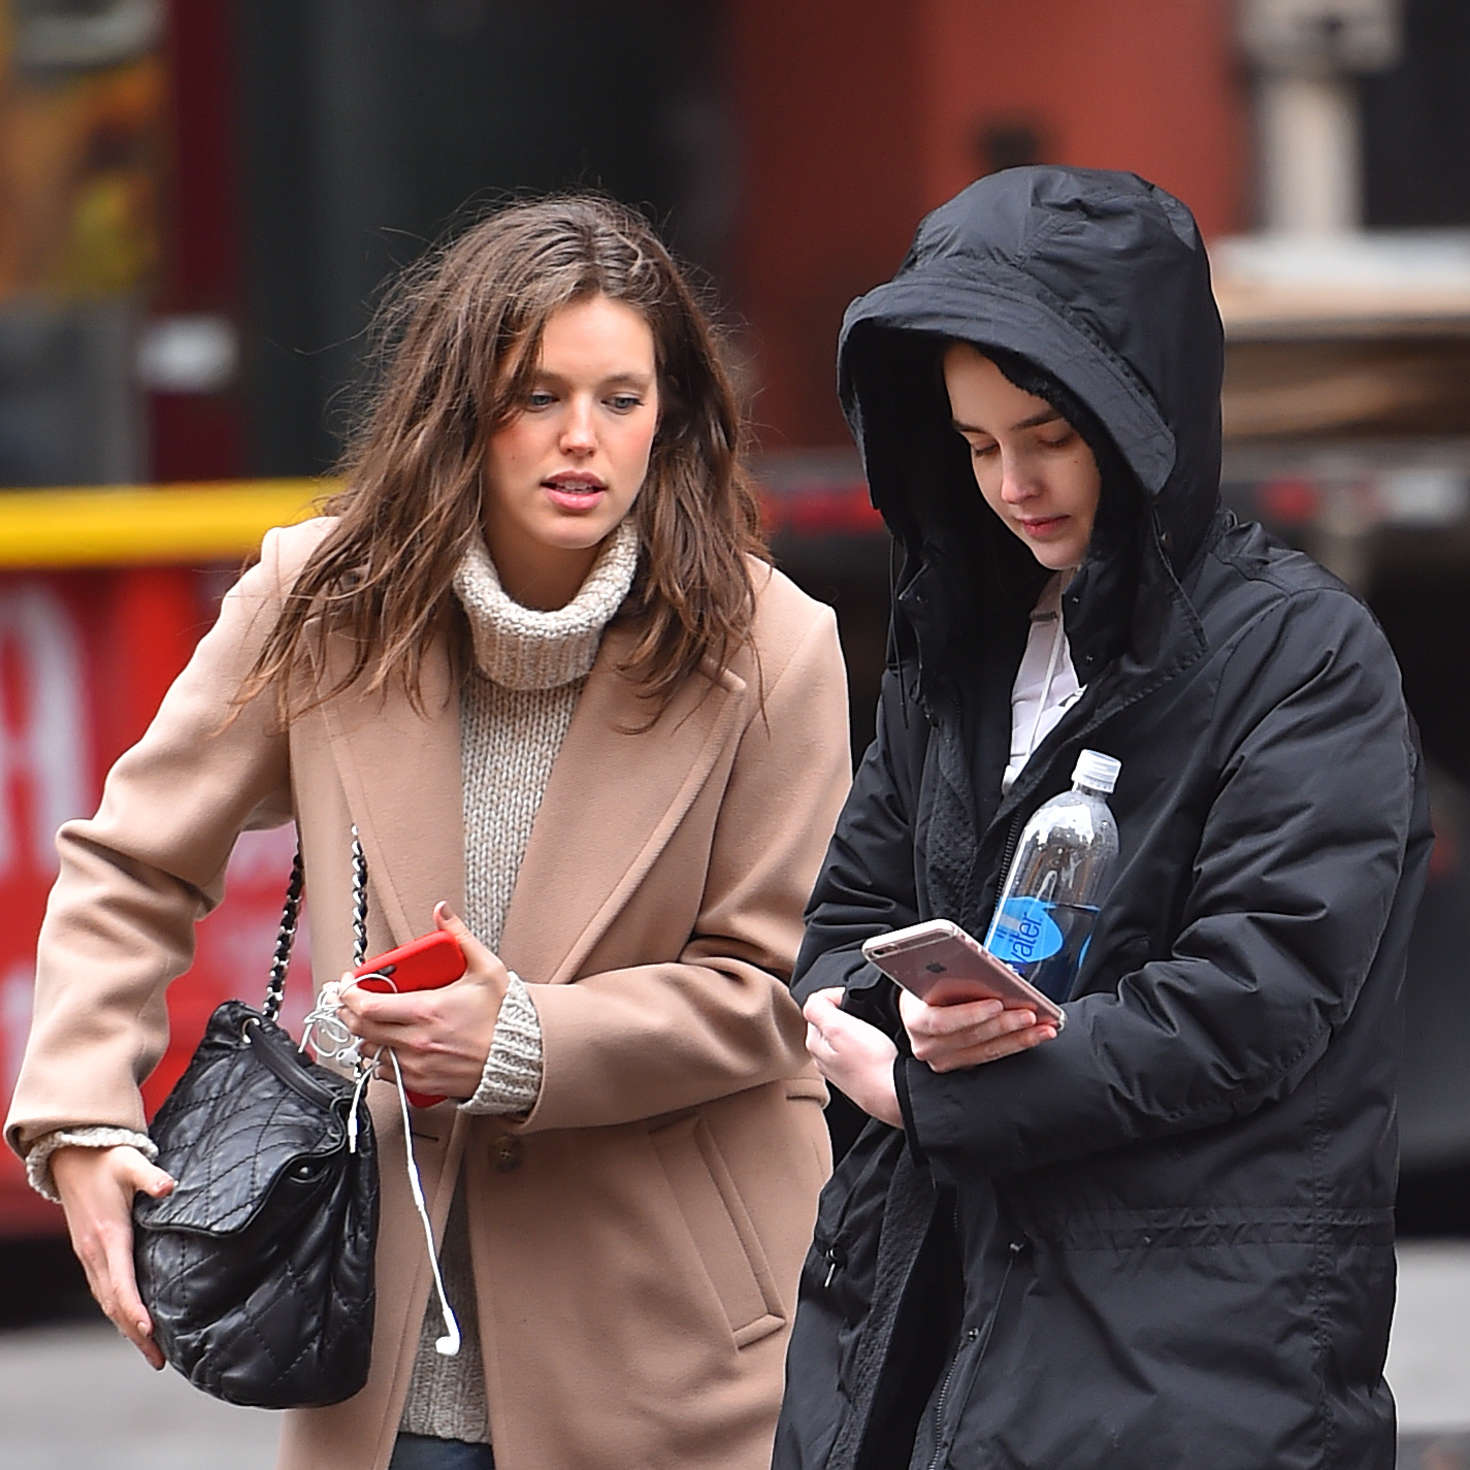 Emily DiDonato and Ali Michael out in New York